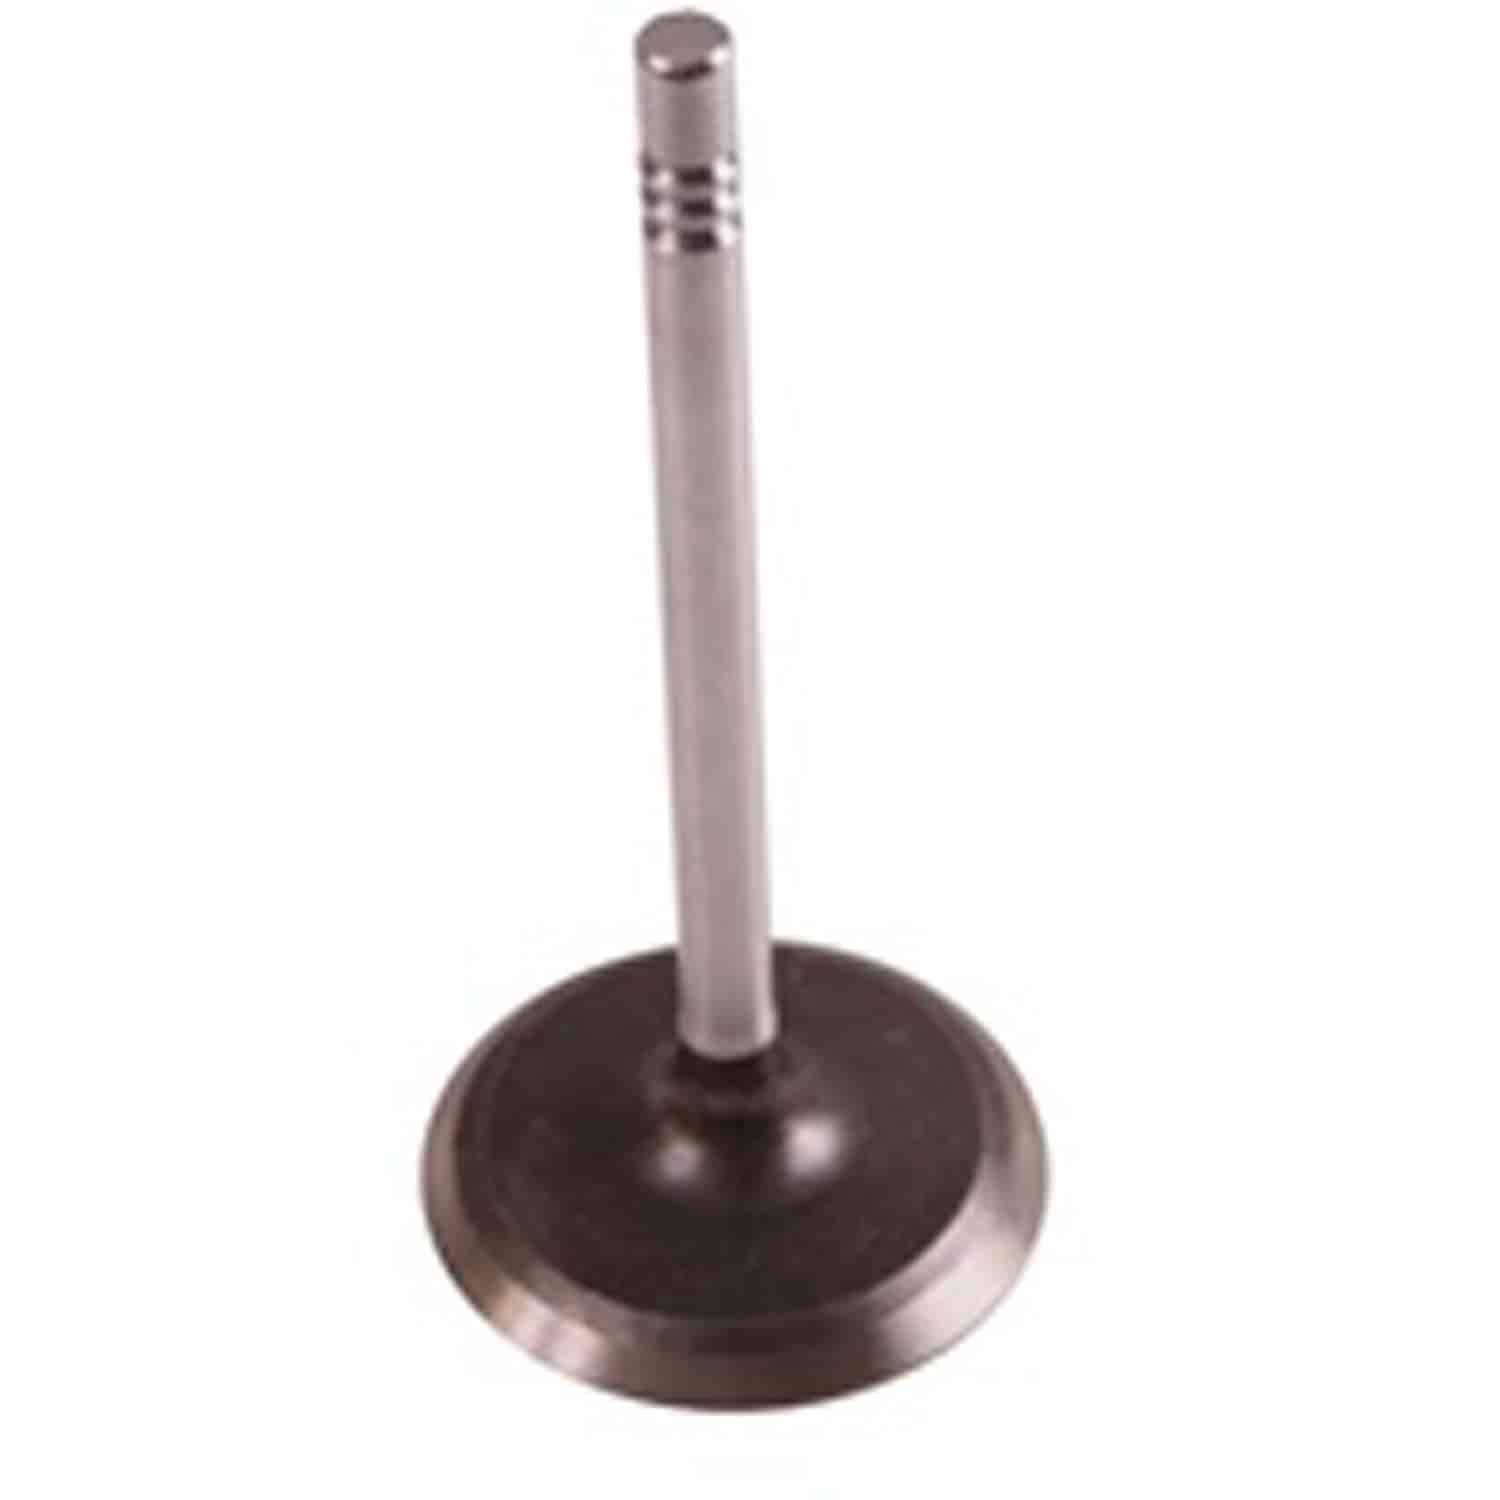 Intake Valve 4.2L .003 1981-1990 Jeep CJ and Wrangler By Omix-ADA